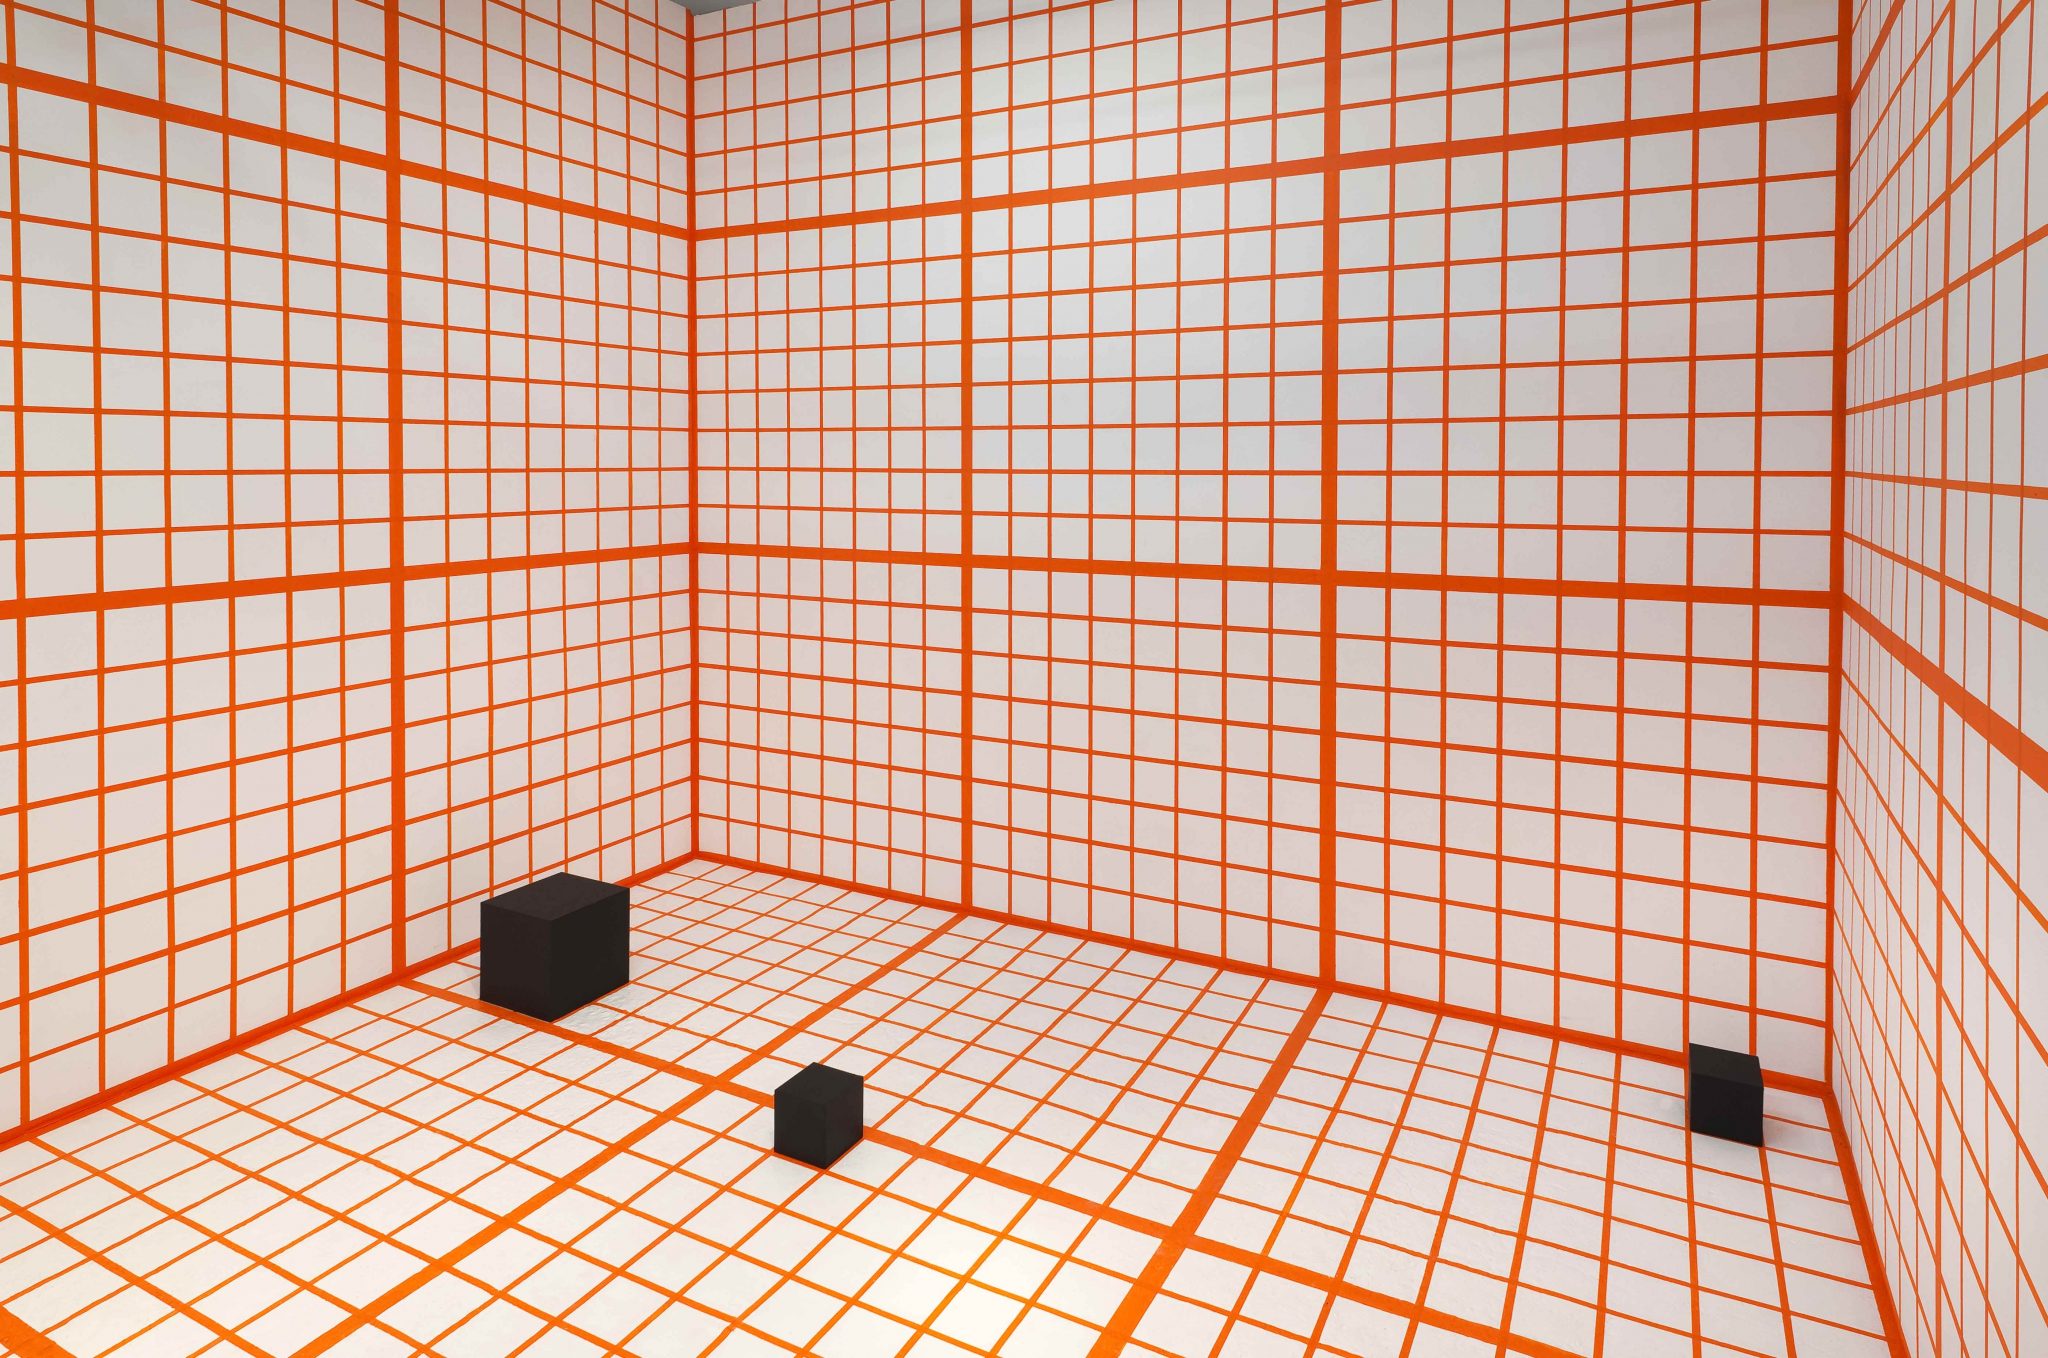 Orange Grid, 2013. Photo: Robert Wedemeyer. Courtesy the artist and François Ghebaly Gallery, Los Angeles